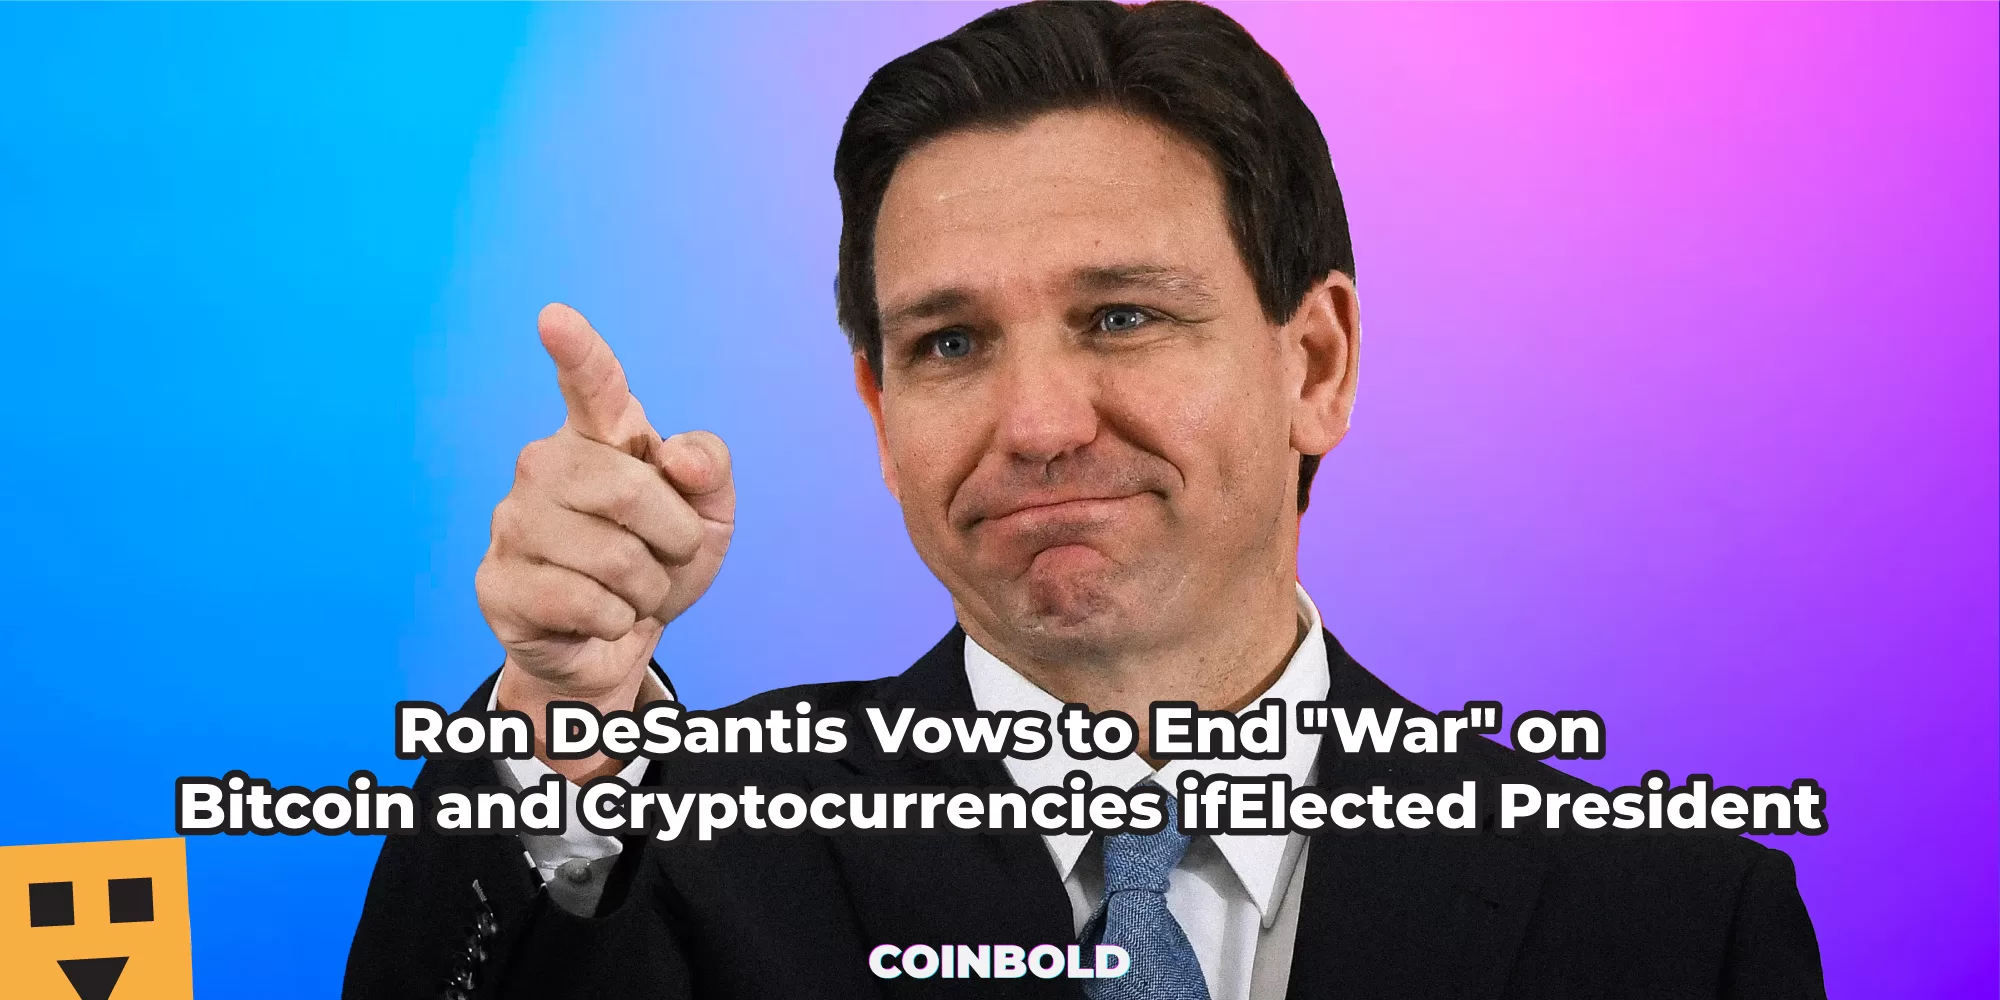 Ron DeSantis Vows to End "War" on Bitcoin and Cryptocurrencies ifElected President